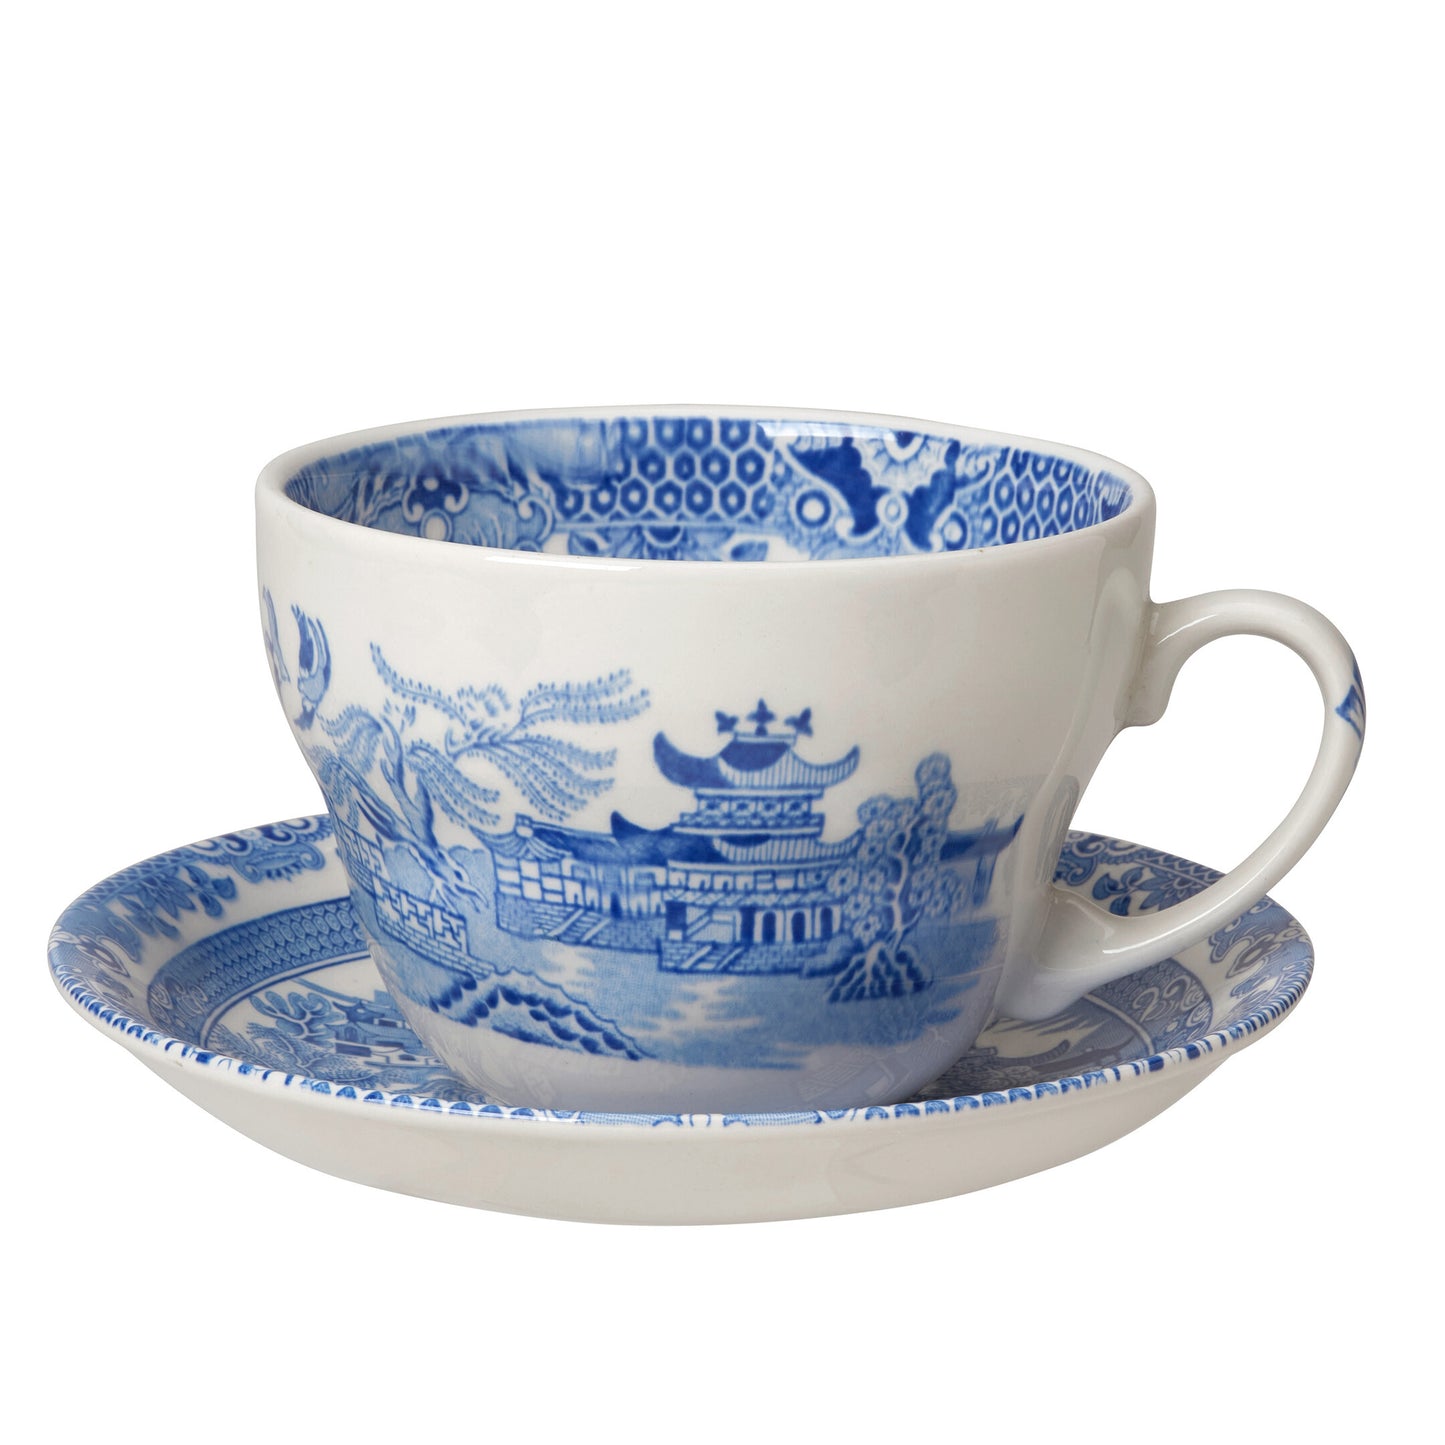 Blue Willow Breakfast Cup & Saucer